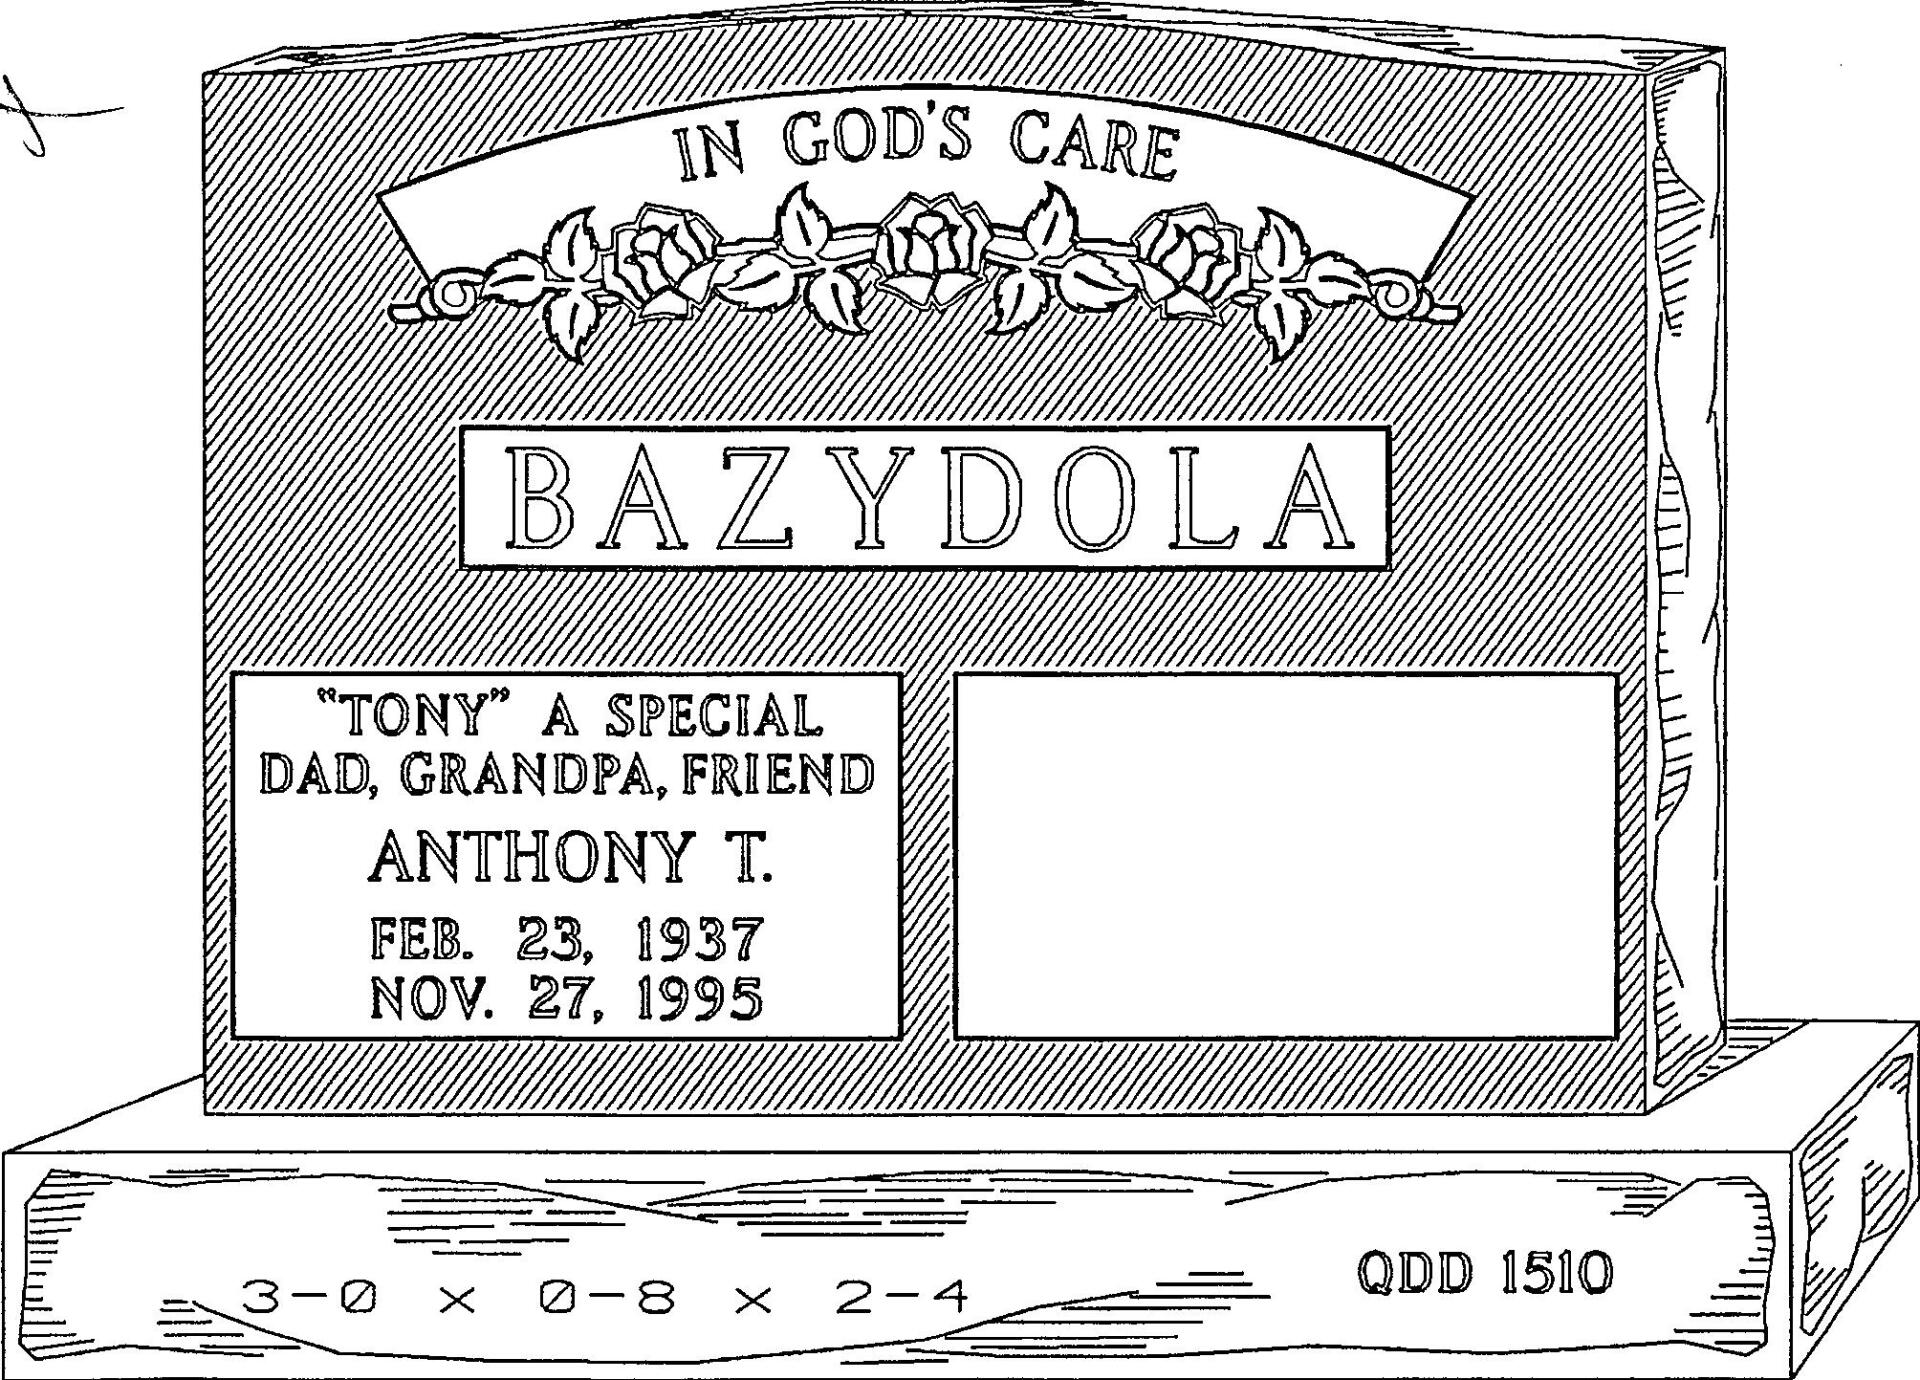 a black and white drawing of a gravestone for bazydola